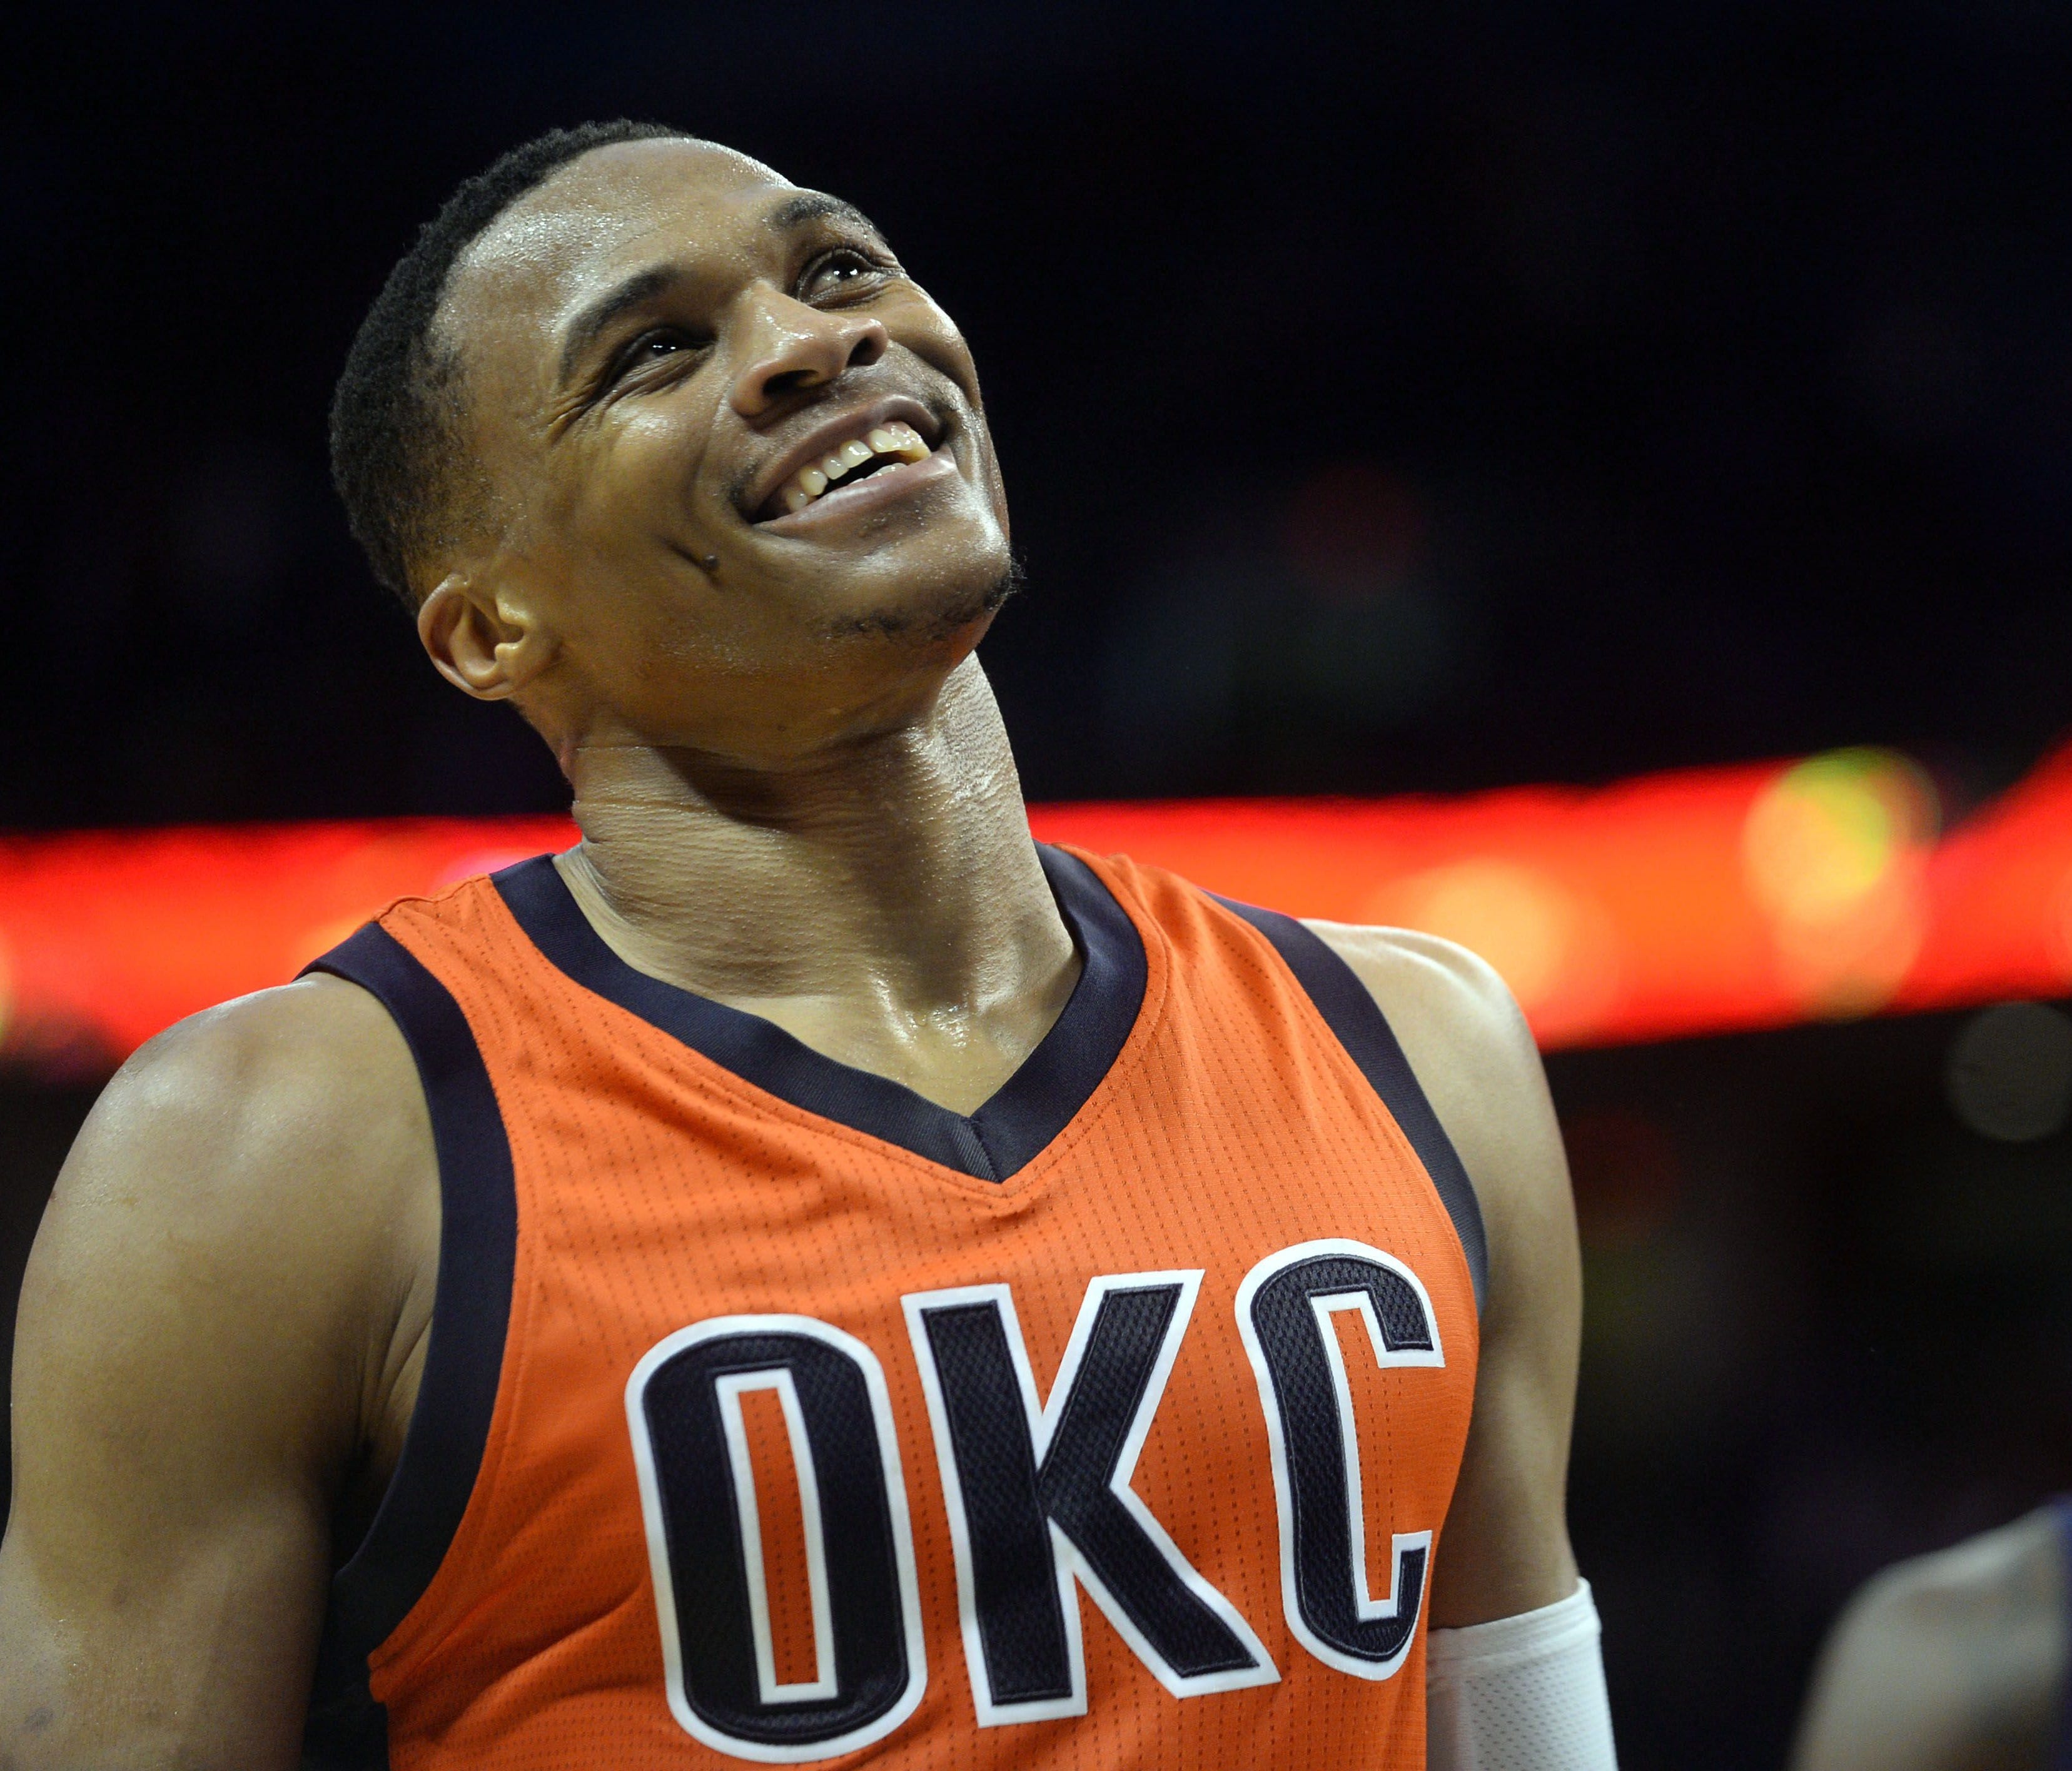 Oklahoma City Thunder guard Russell Westbrook smiles after a play against the Boston Celtics during the fourth quarter at Chesapeake Energy Arena.